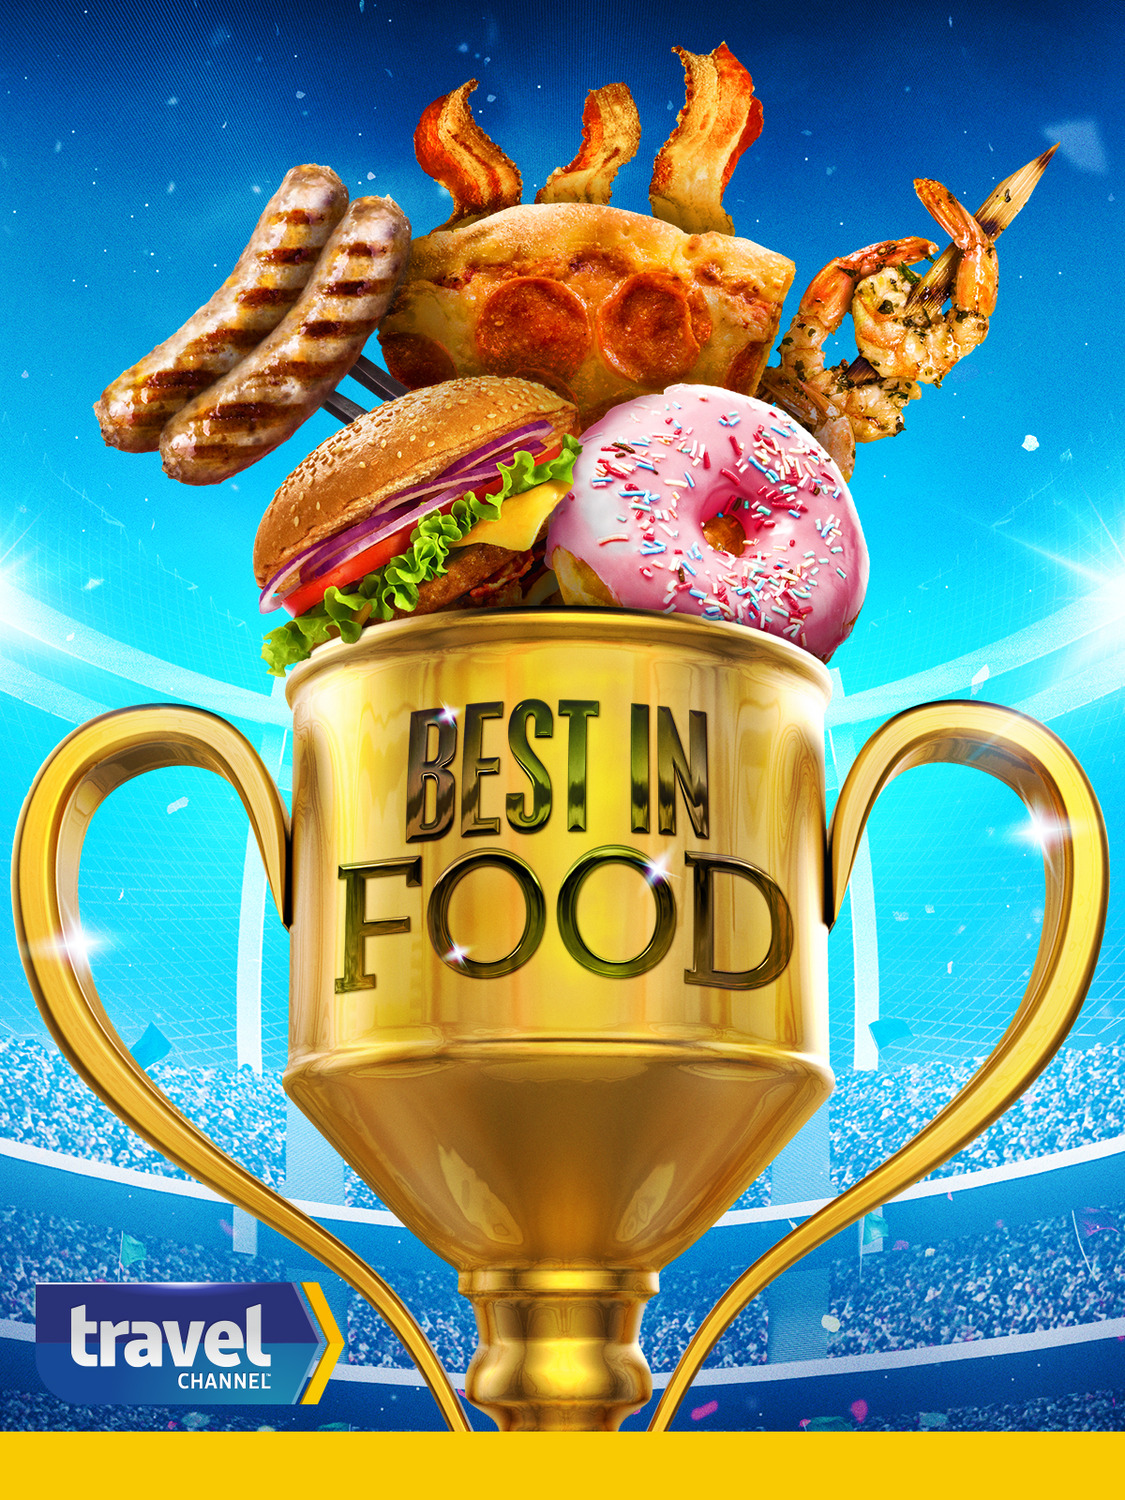 Extra Large TV Poster Image for Best in Food 